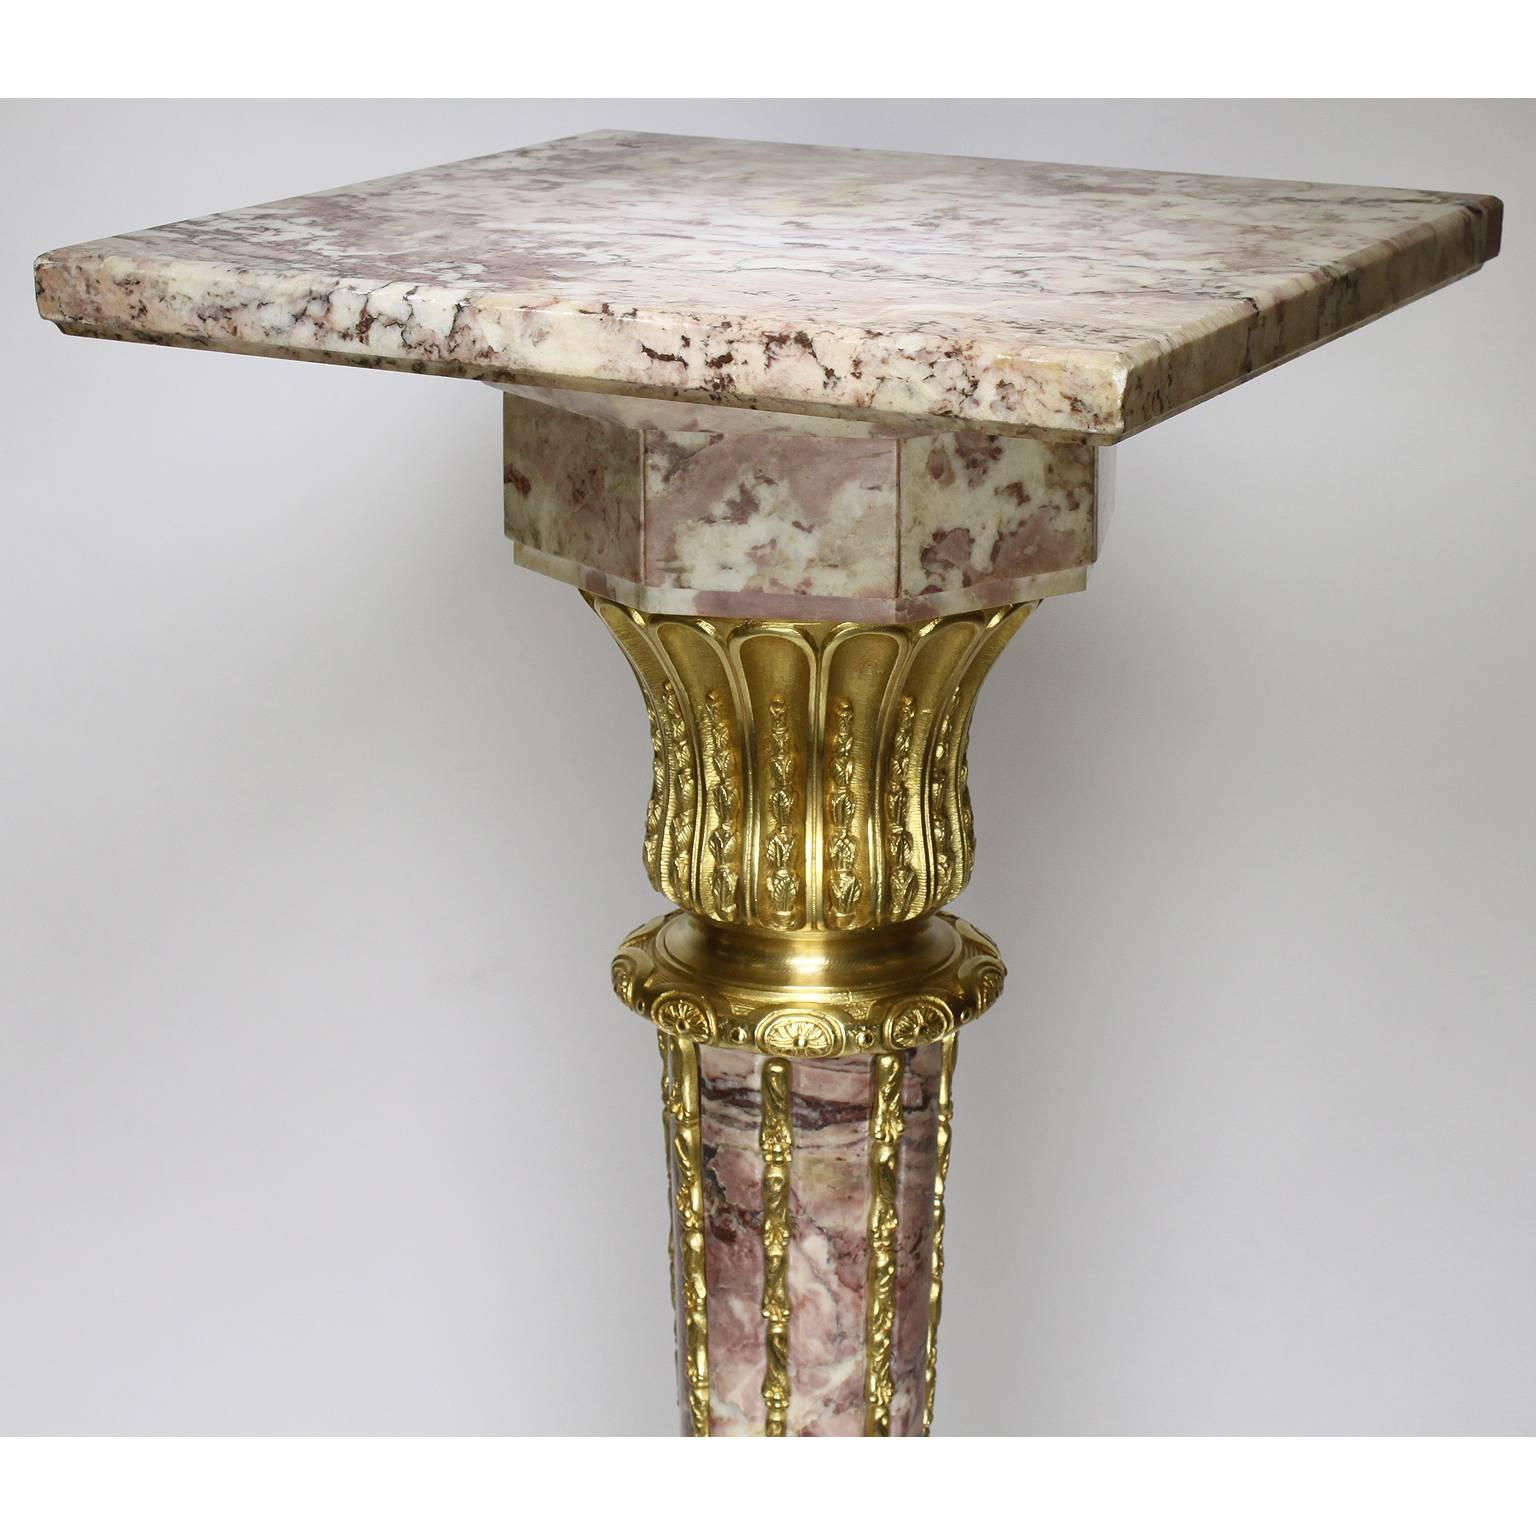 French 19th Century Louis XVI Style Marble and Gilt-Bronze Mounted Pedestal Stand